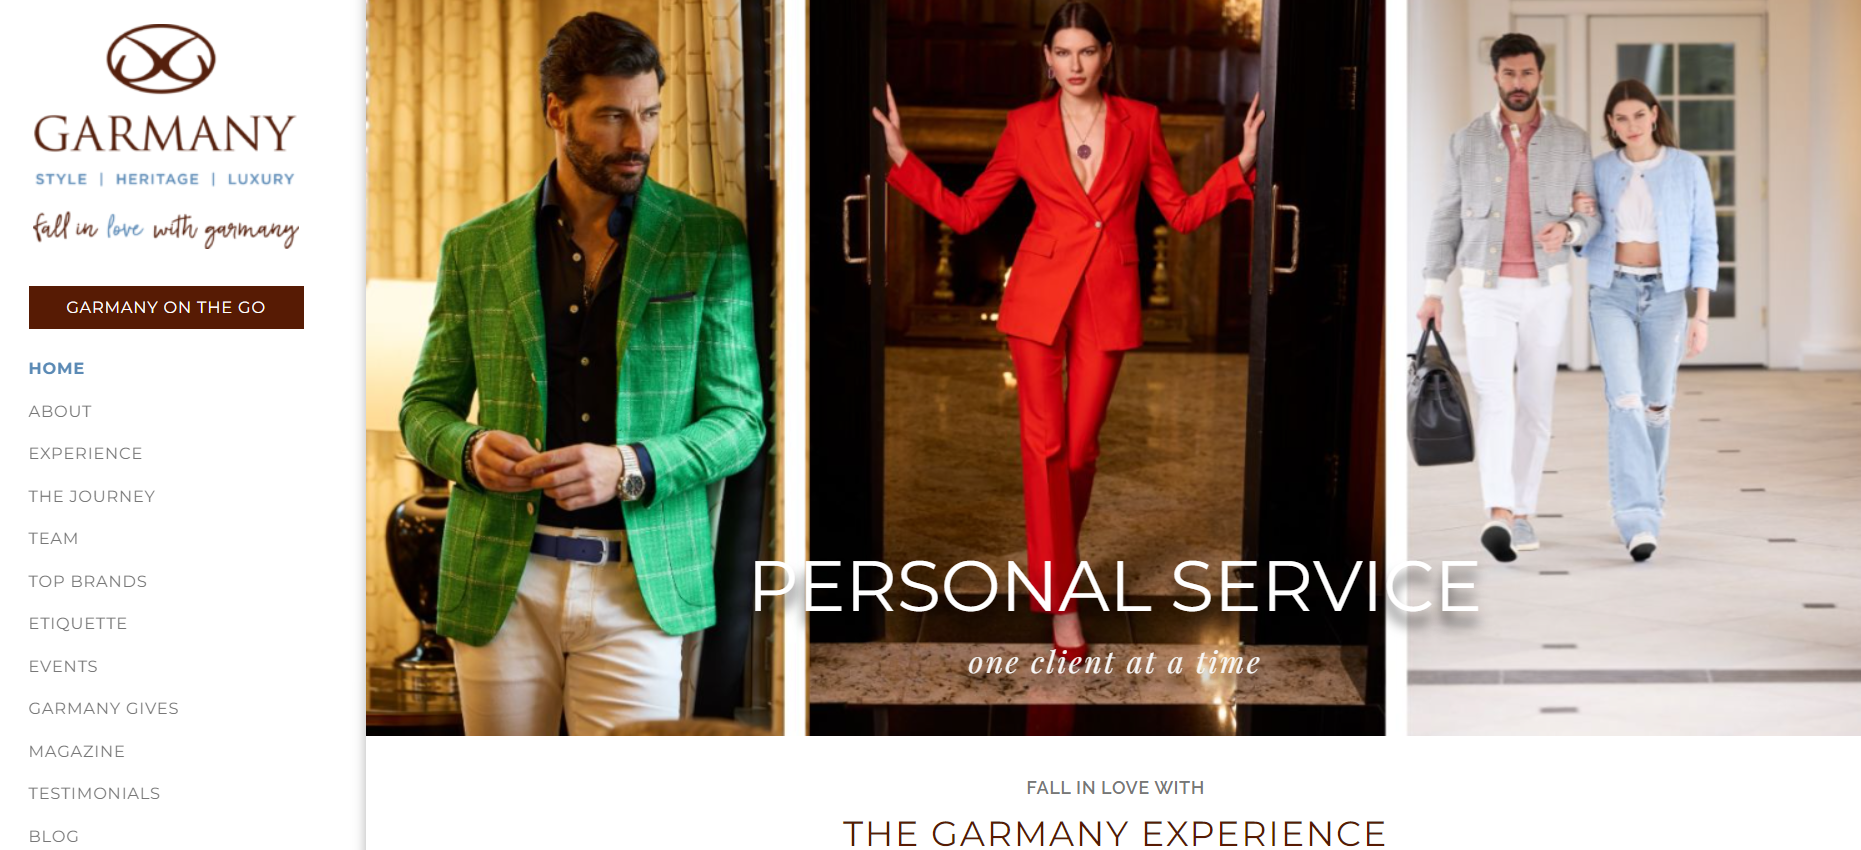 Garmany is a prominent wholesale clothing supplier offering an extensive selection of men's and women's clothing. Known for their outstanding customer service and exceptional tailoring, they cater to a clientele looking for high-quality and stylish clothing. 